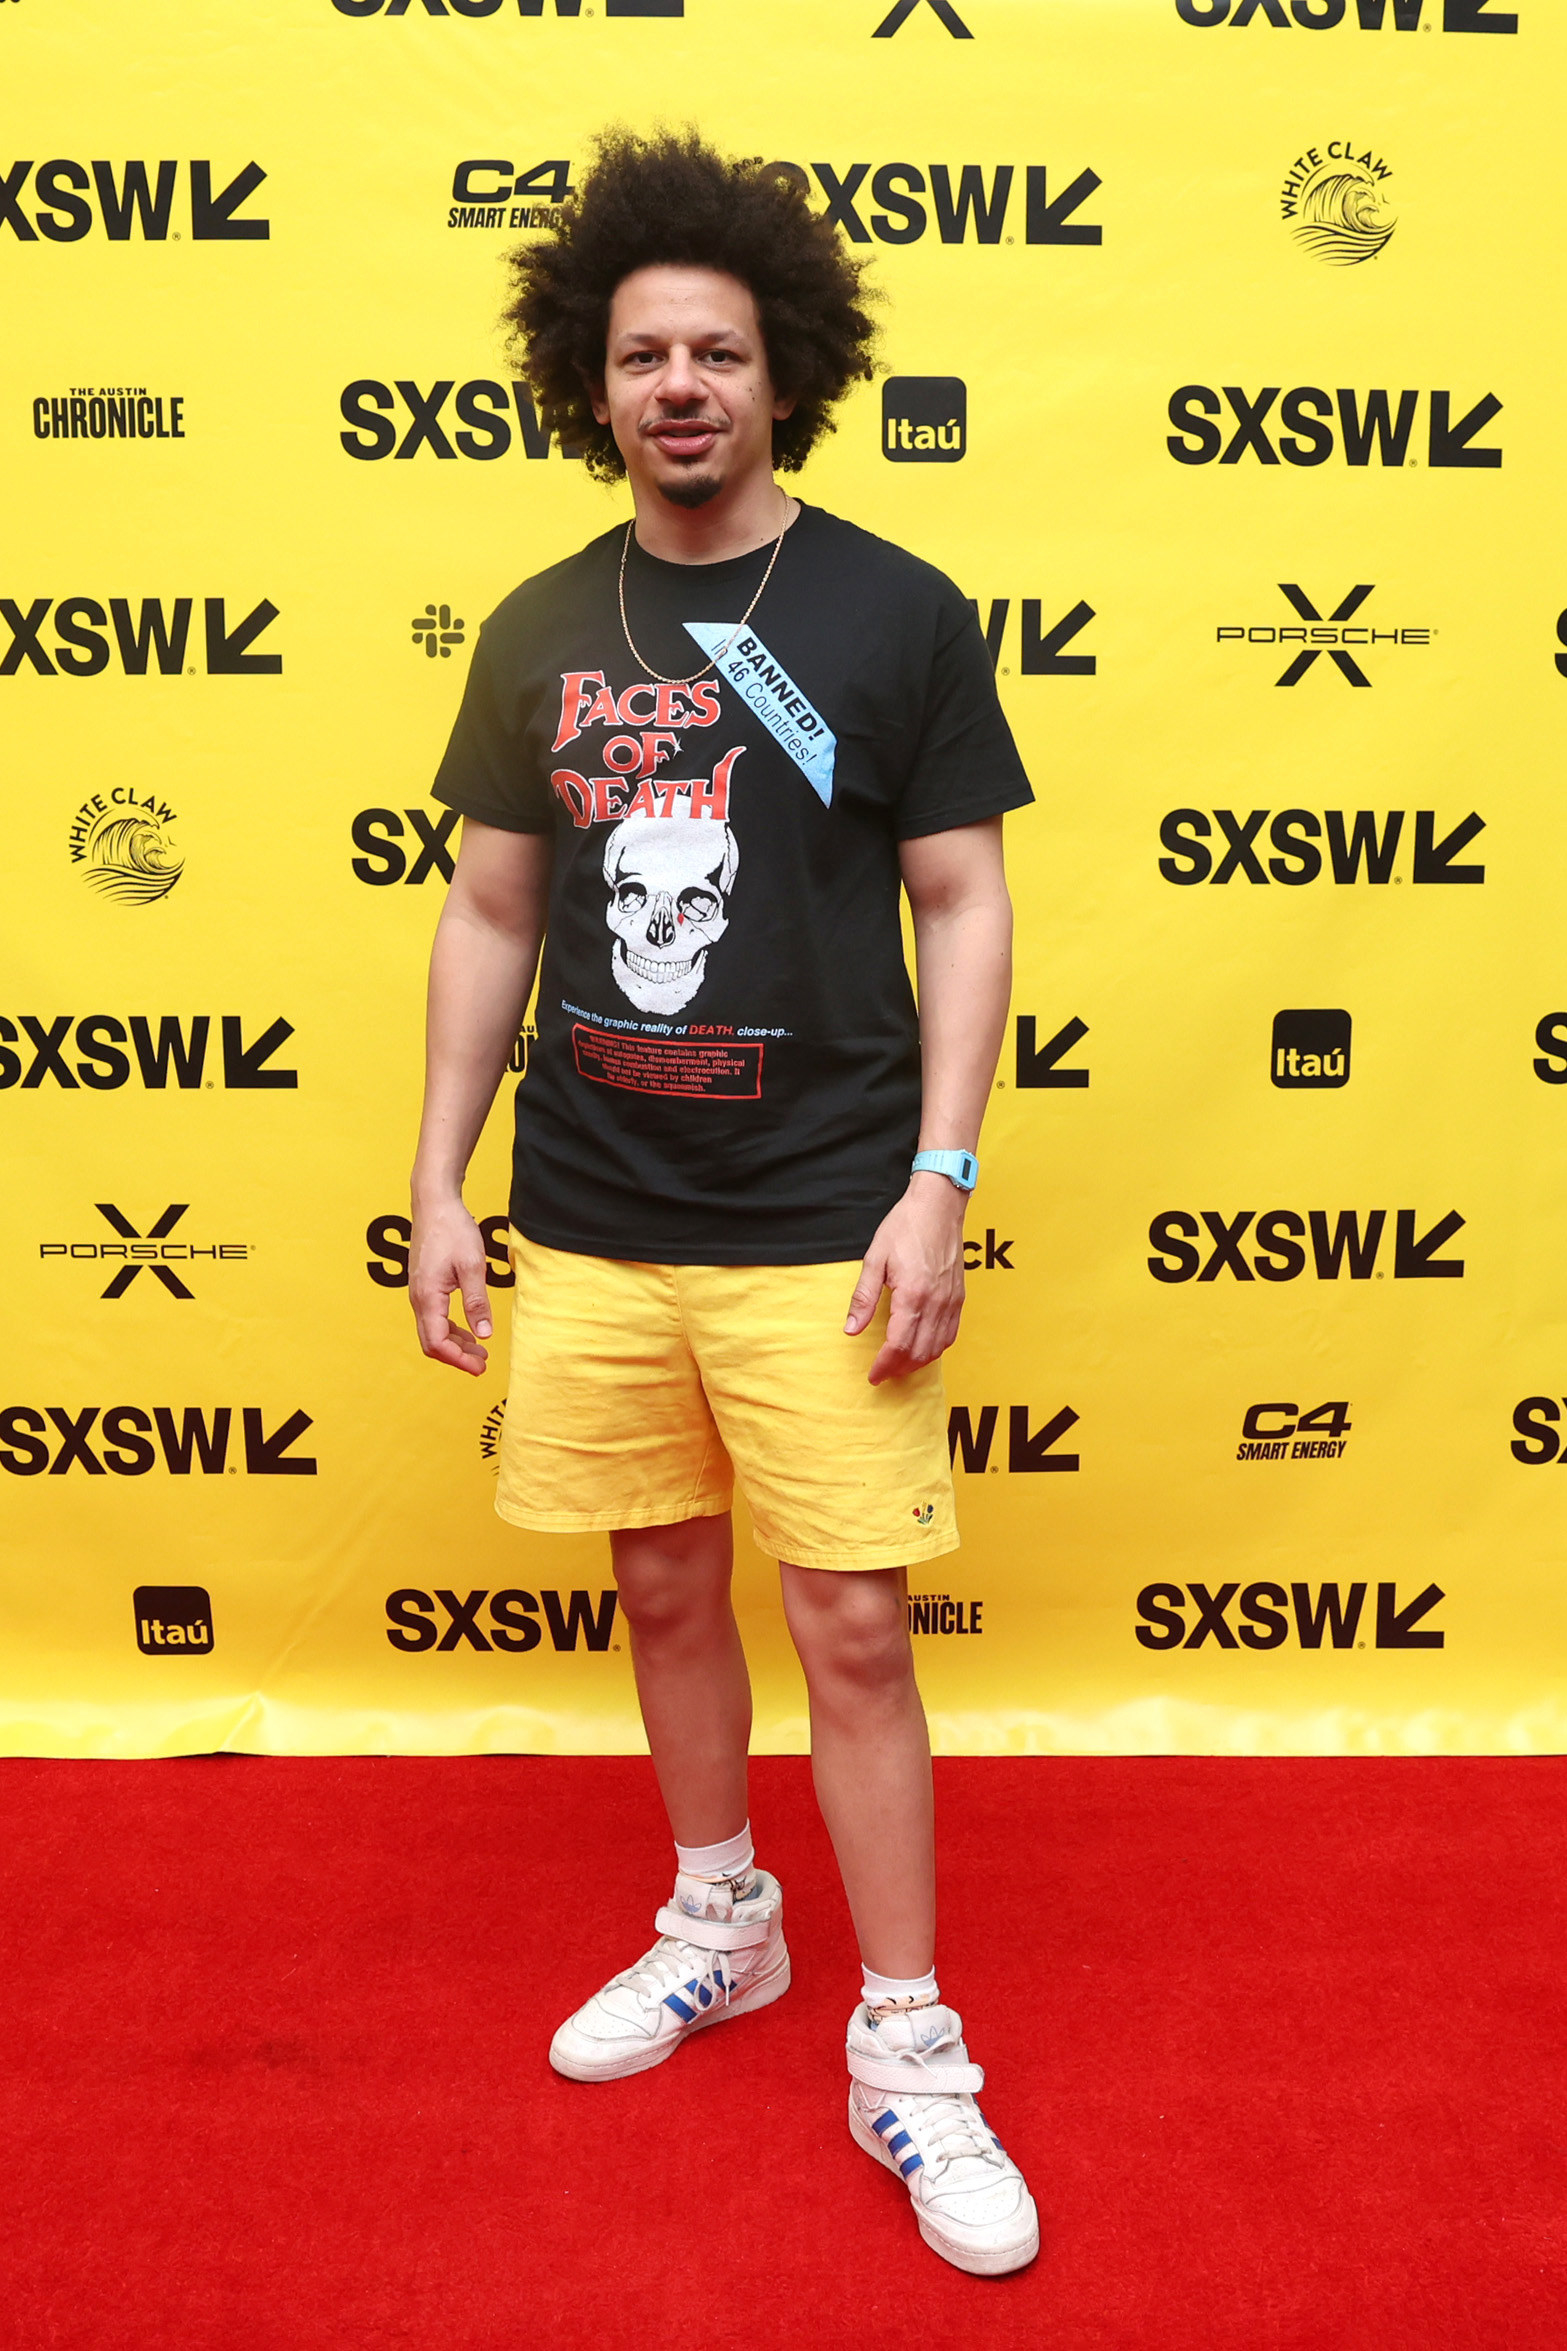 Eric wearing a &quot;Faces of Death&quot; T-shirt at the SXSW red carpet